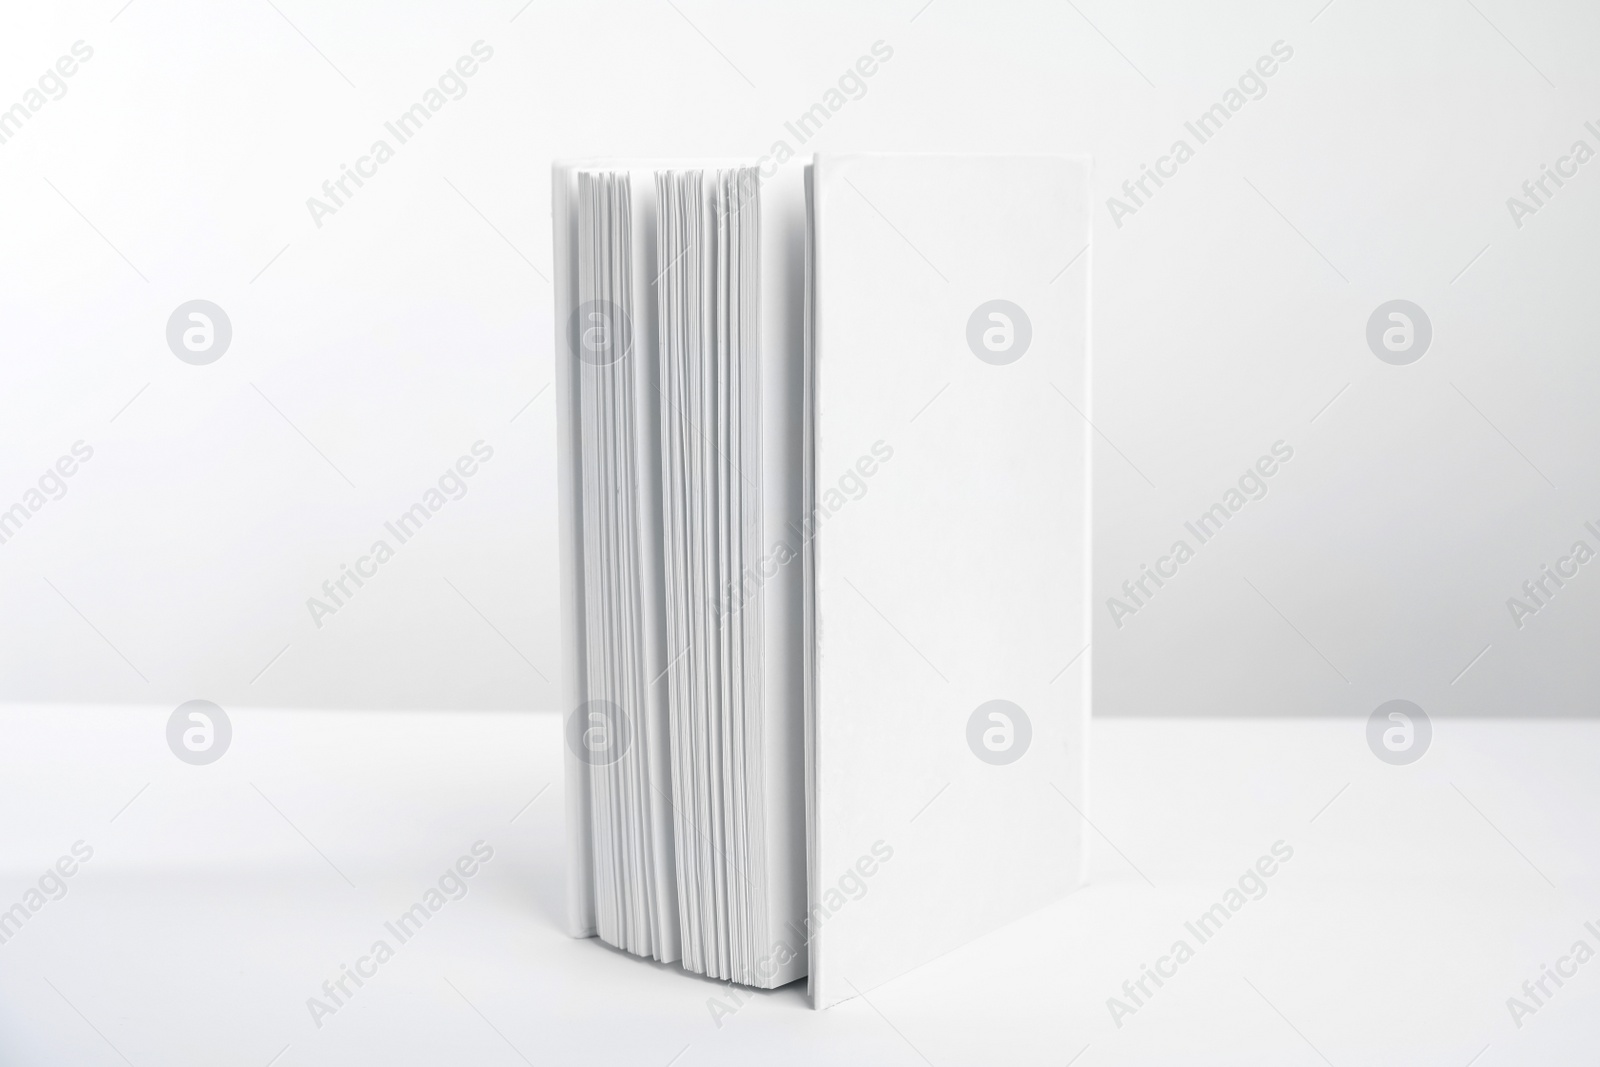 Photo of Book with blank cover on white background